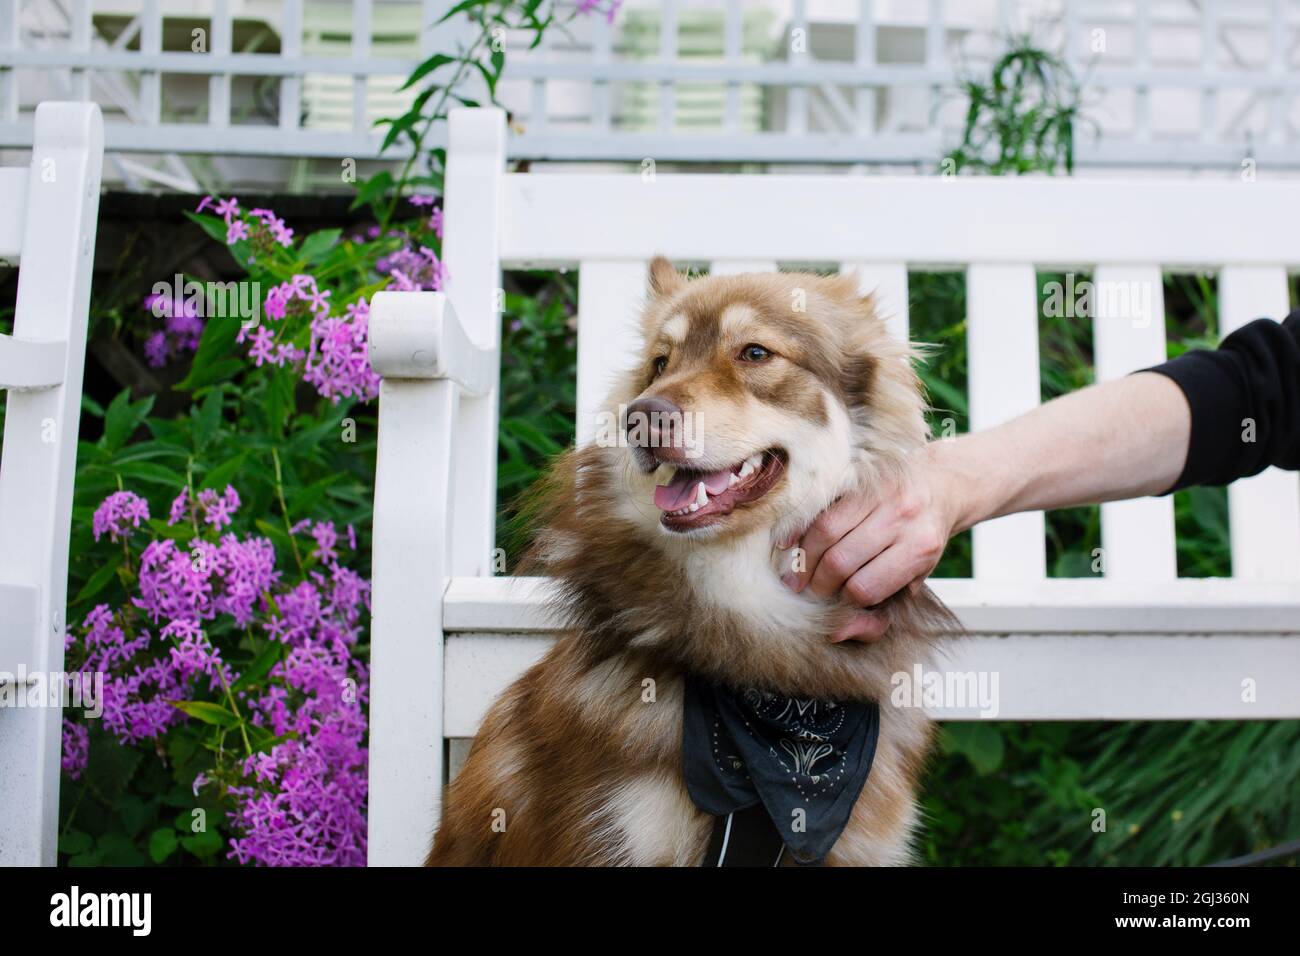 Dog (Finnish lapphund) sitting in a garden, owner petting the dog. Stock Photo